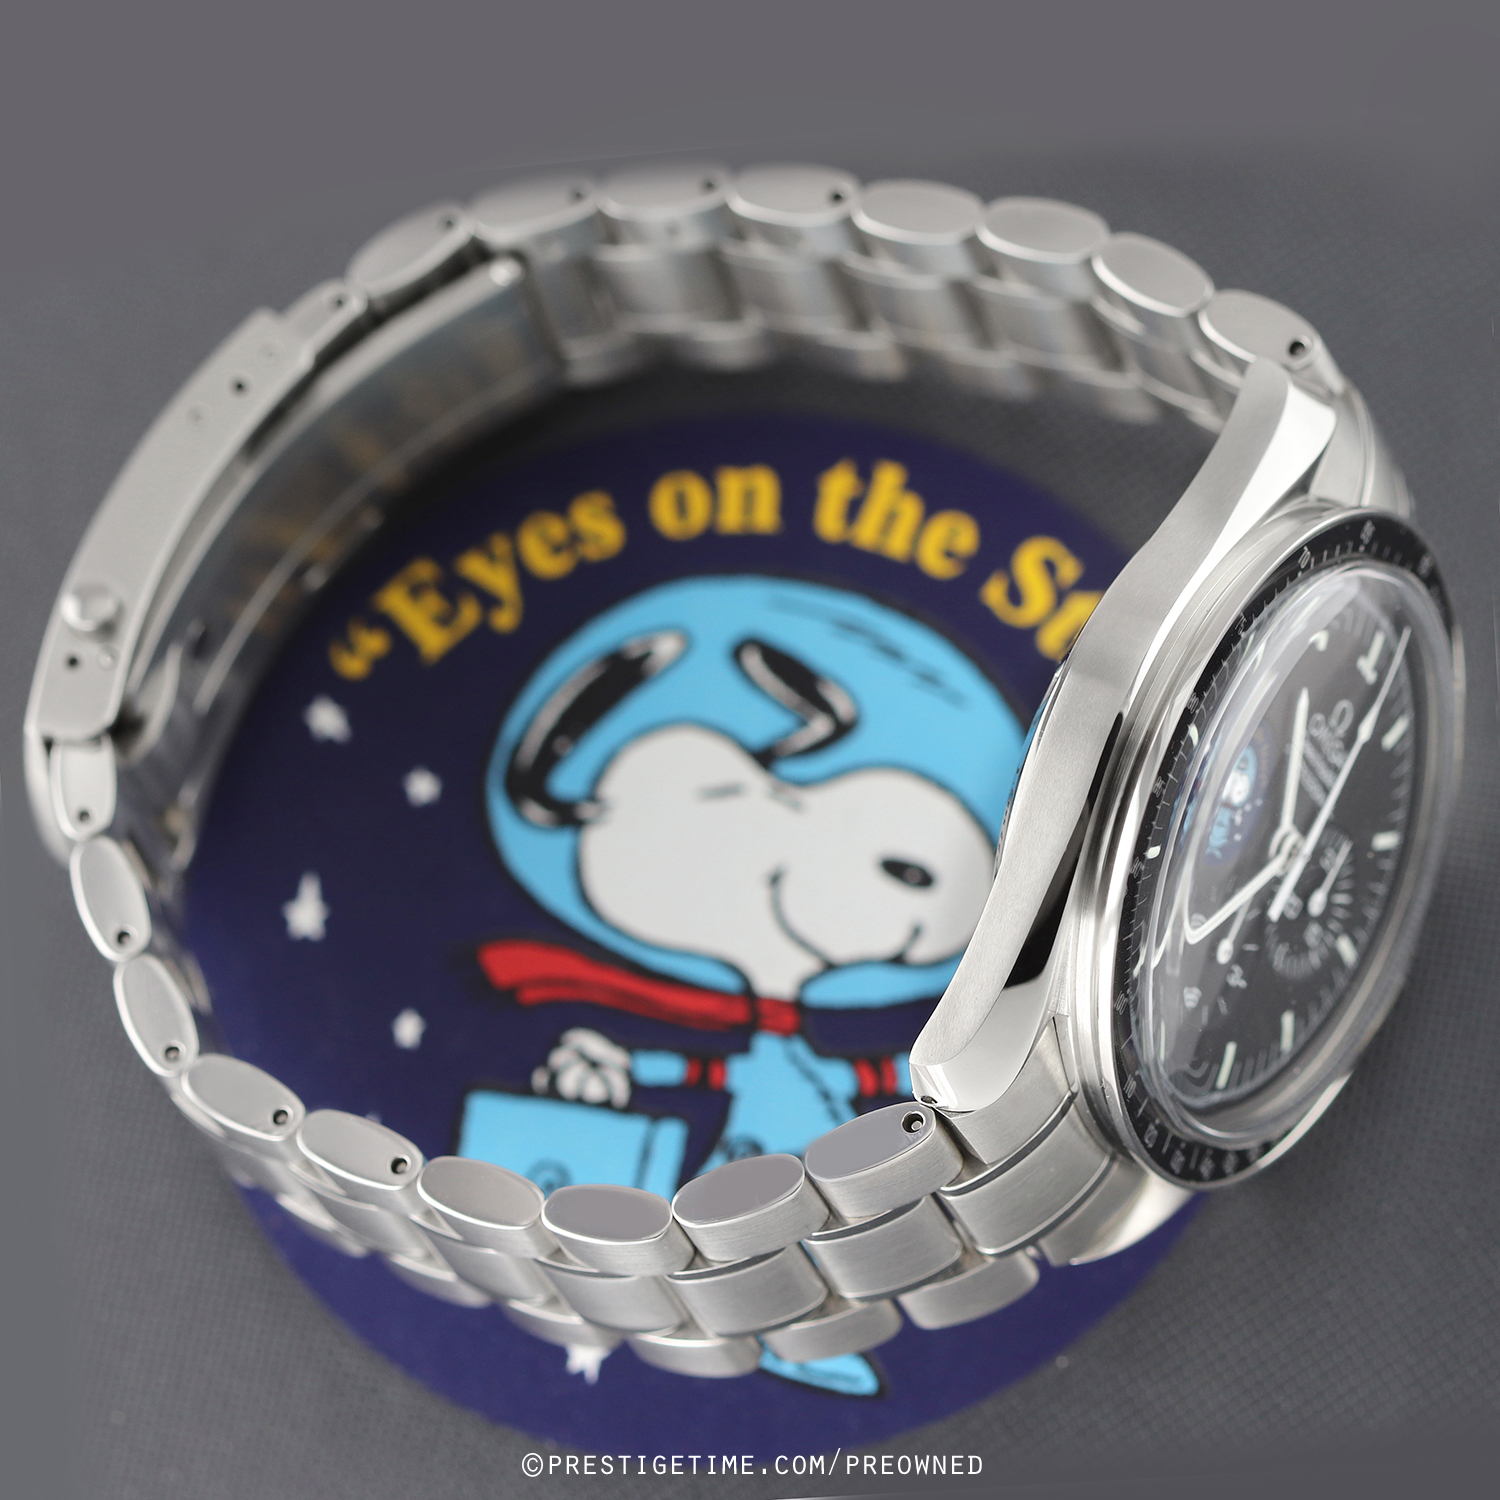 Pre-owned Omega Speedmaster Professional Moonwatch SNOOPY ...